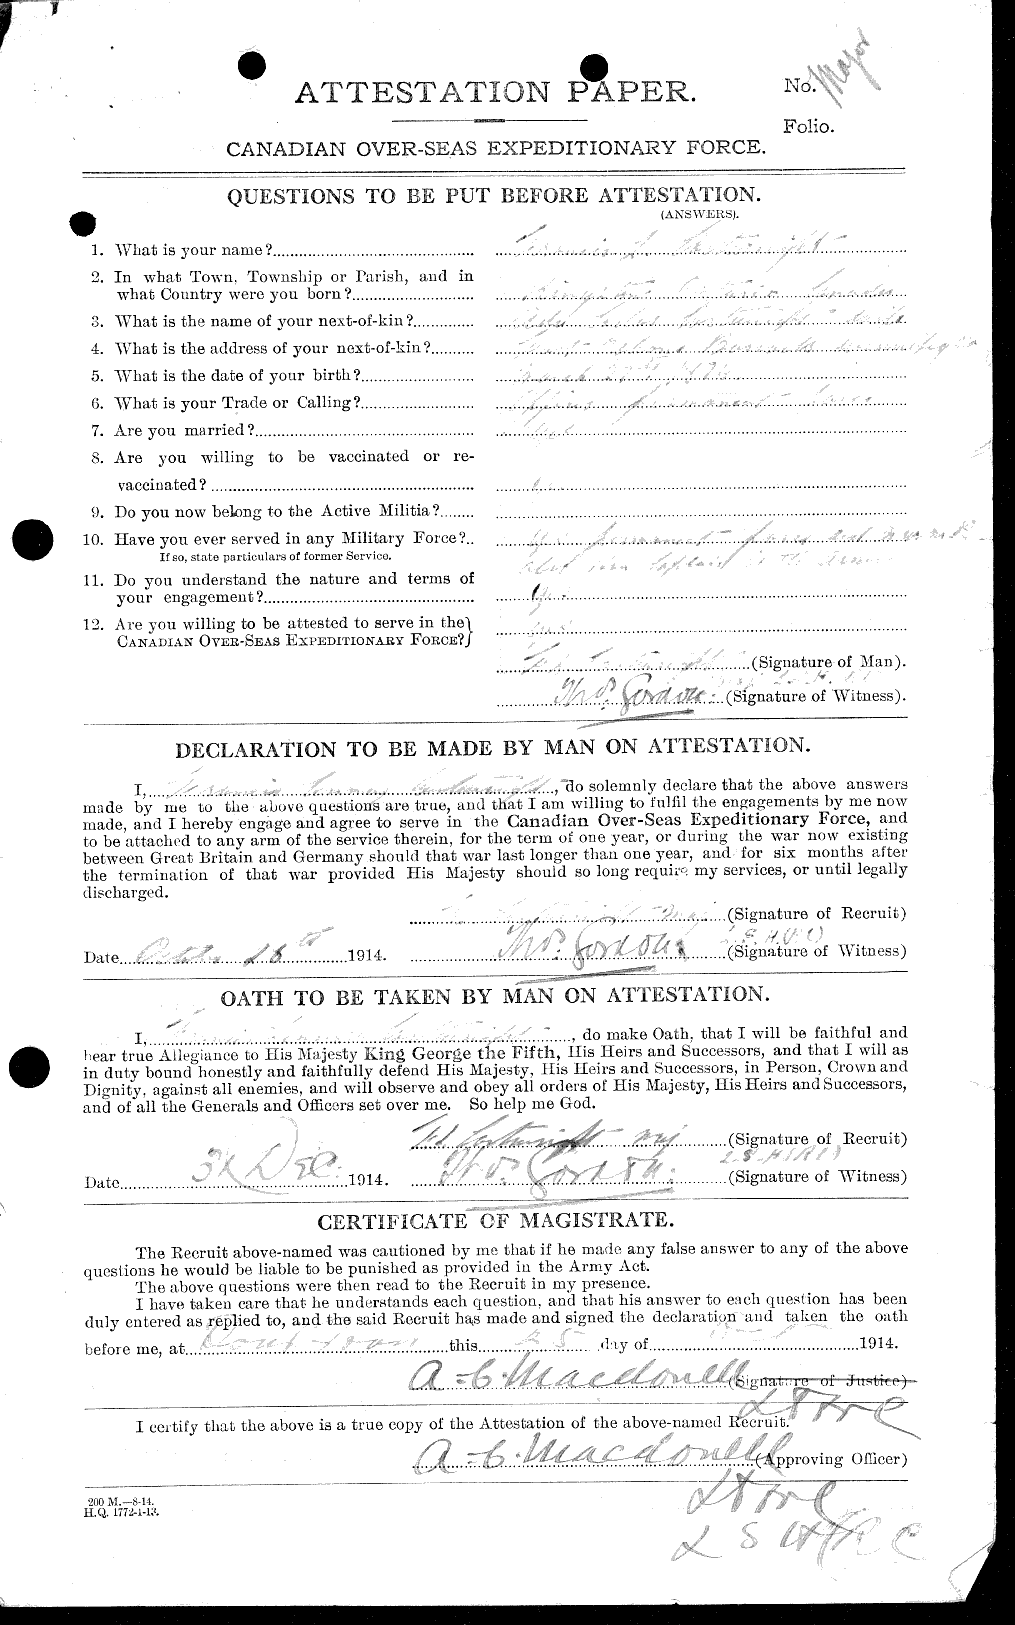 Personnel Records of the First World War - CEF 011570a